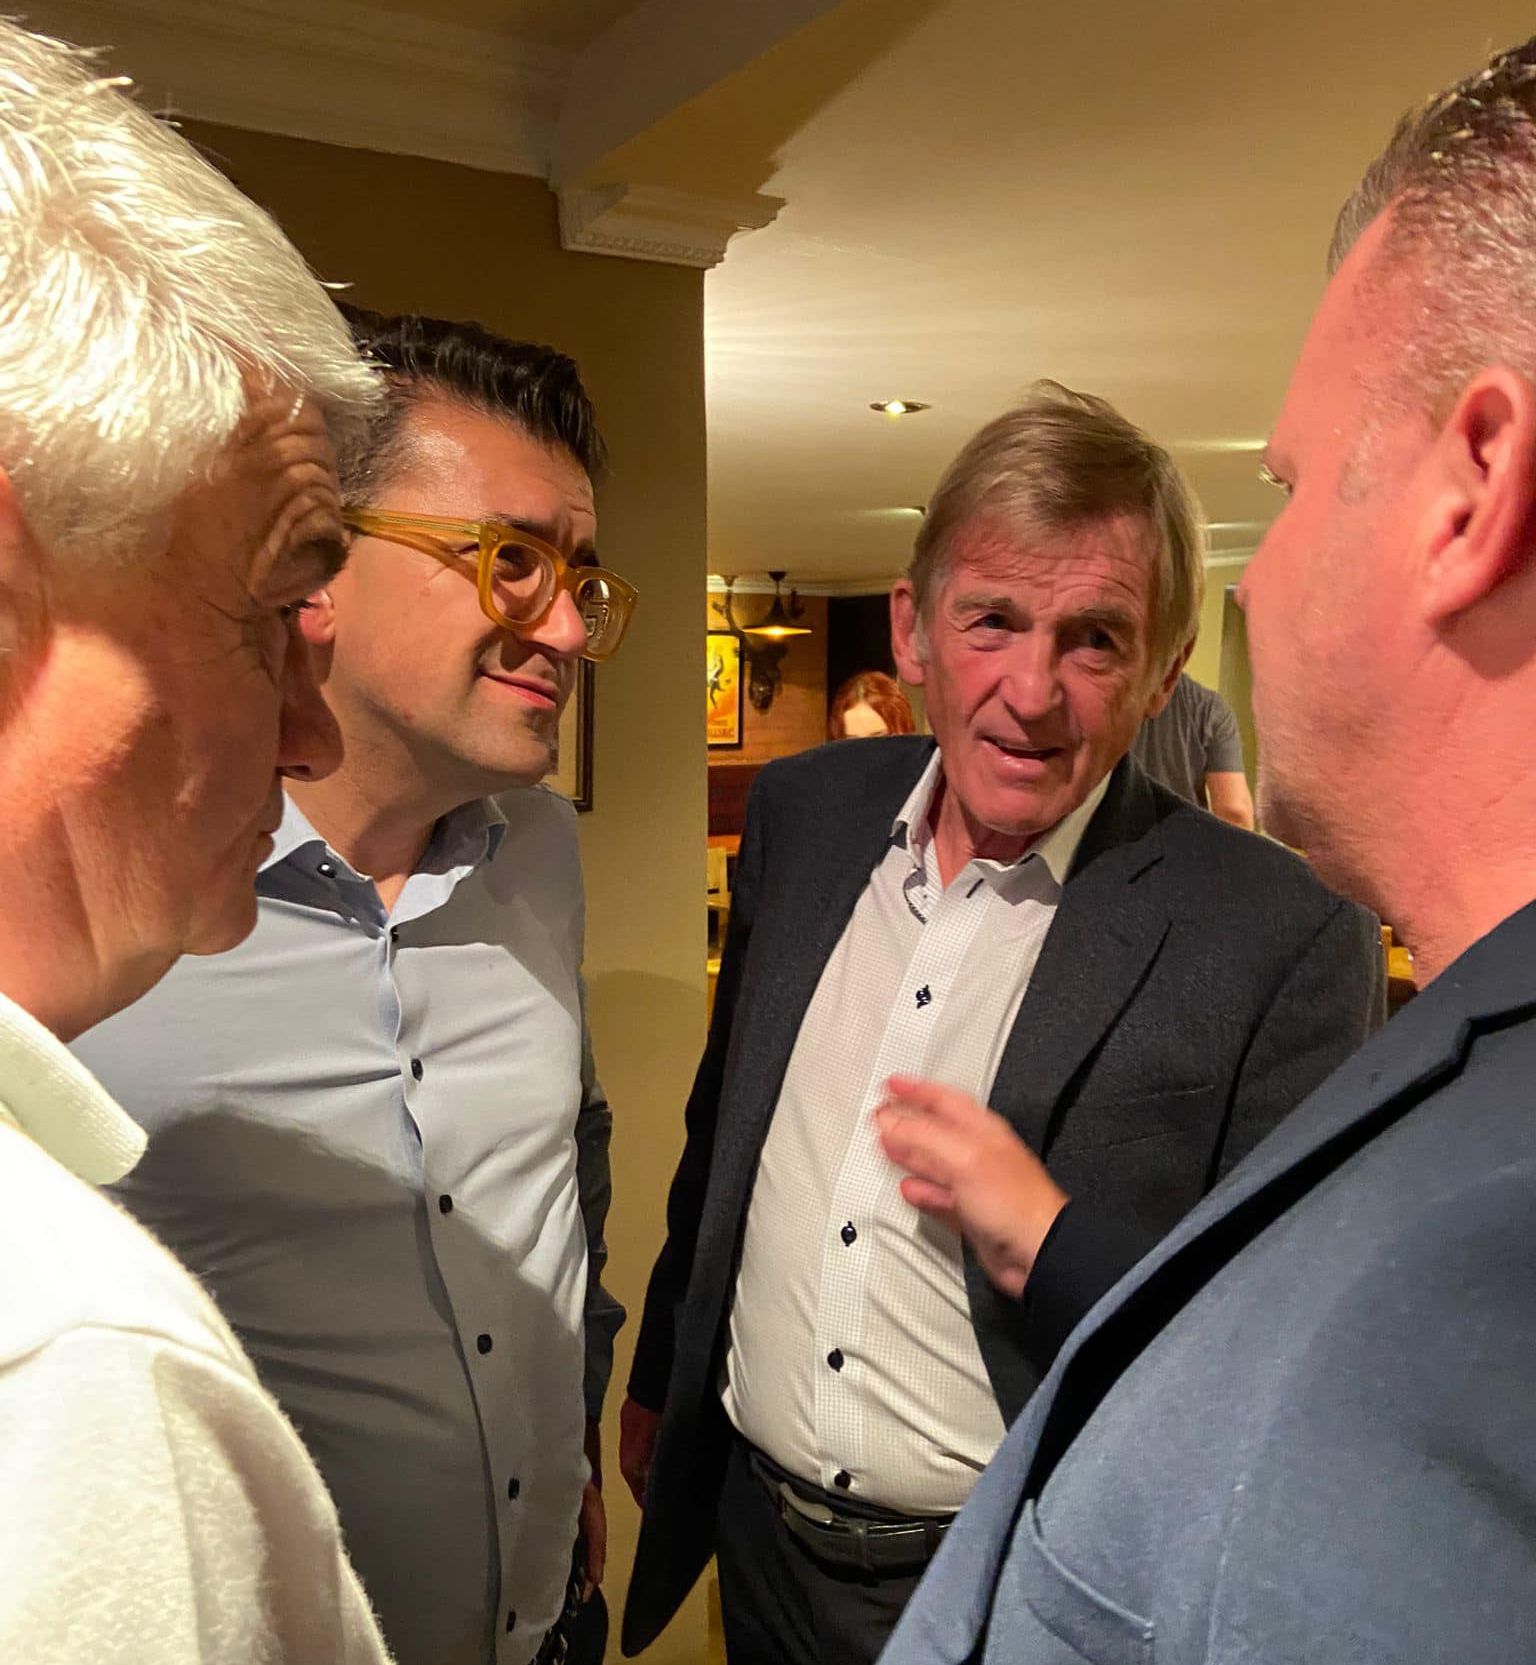 Neil Gokcen (second left, with Sir Kenny Dalglish, third left) hosted a fundraising Sportsmans Dinner at Auberge restaurant in Southport to raise money for The Larks / Marina Dalglish Appeal in memory of his wife Catherine